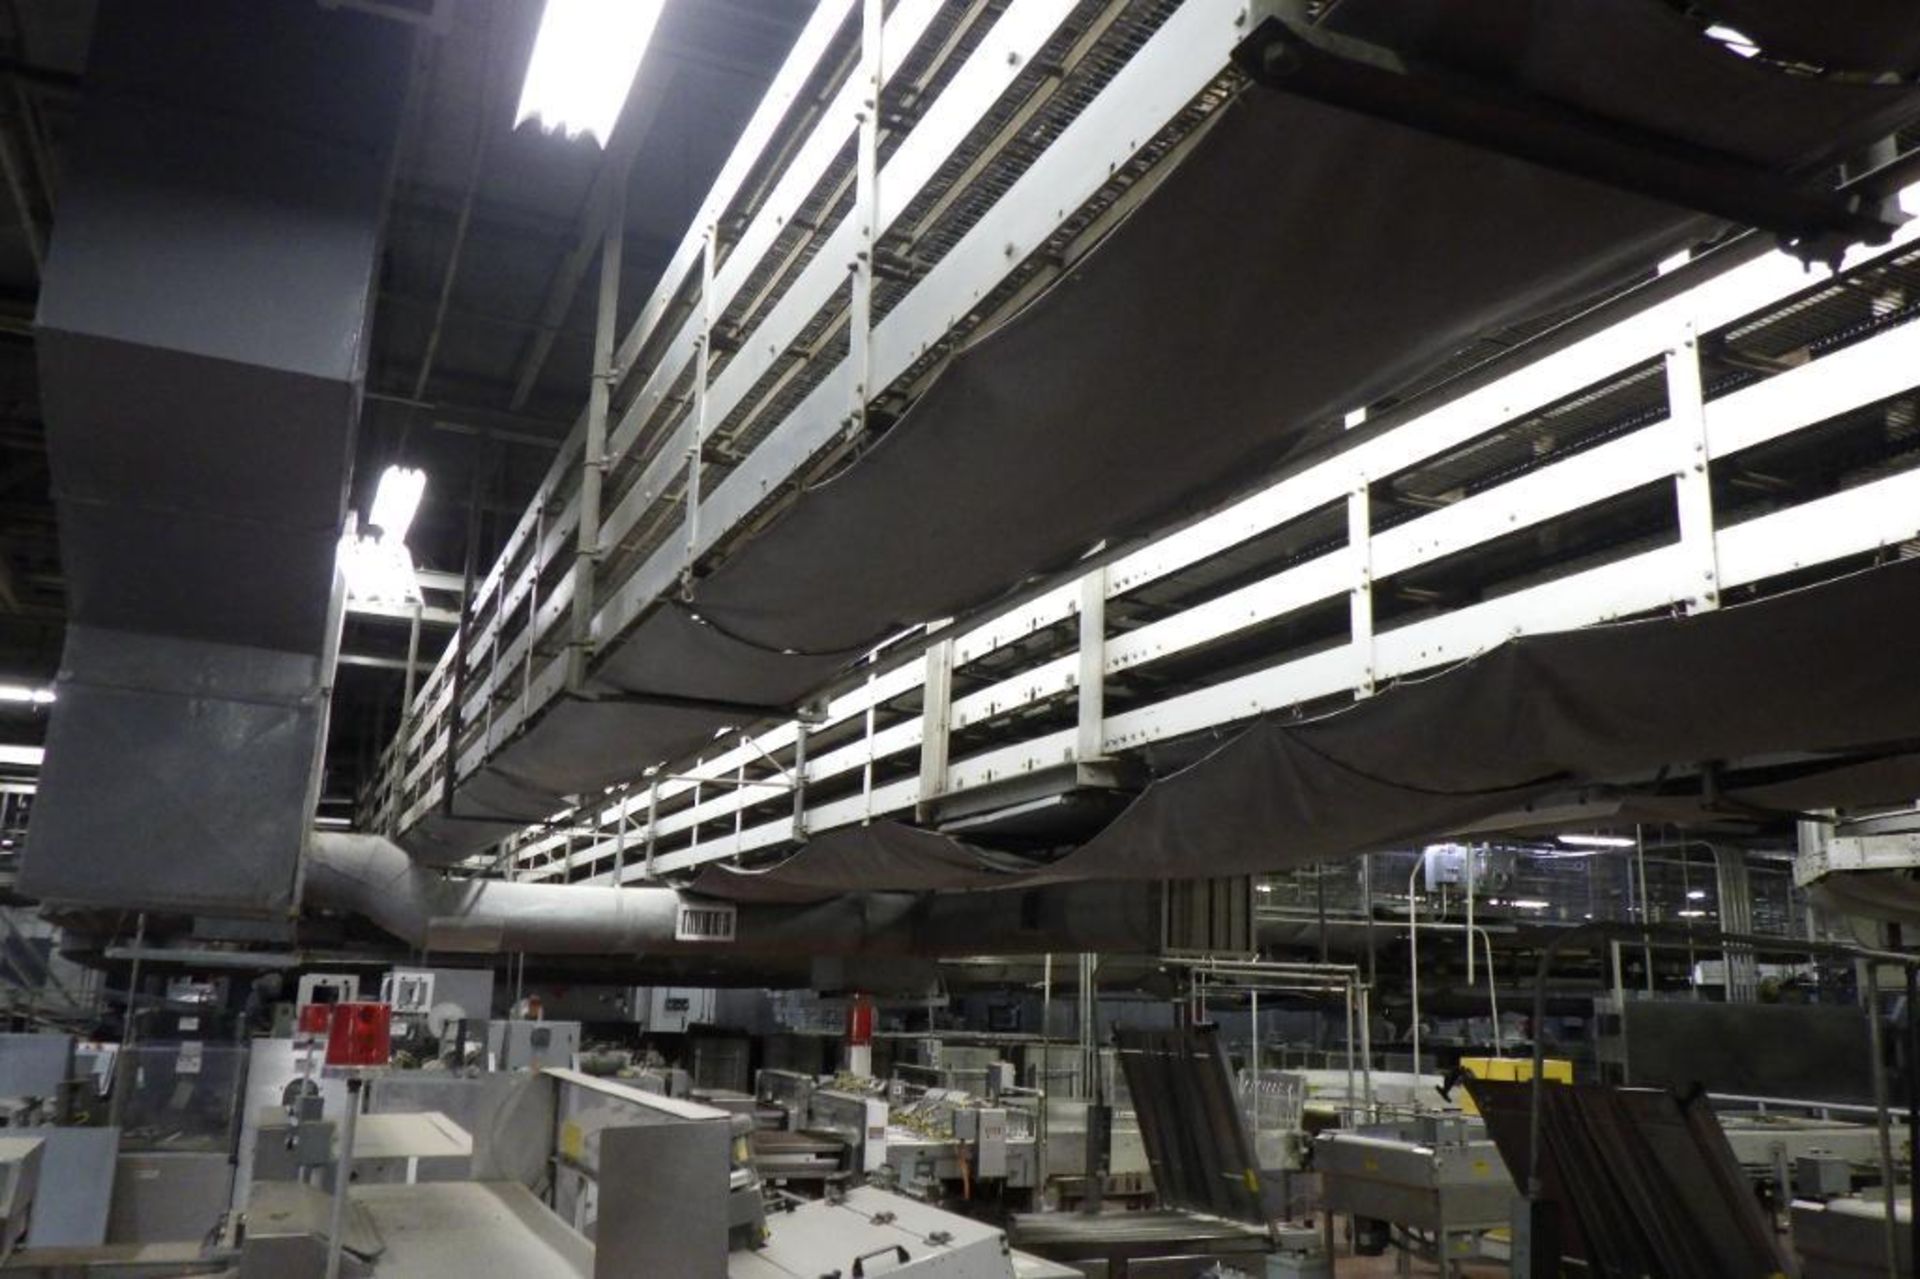 Stewart systems racetrack cooling conveyor - Image 14 of 32